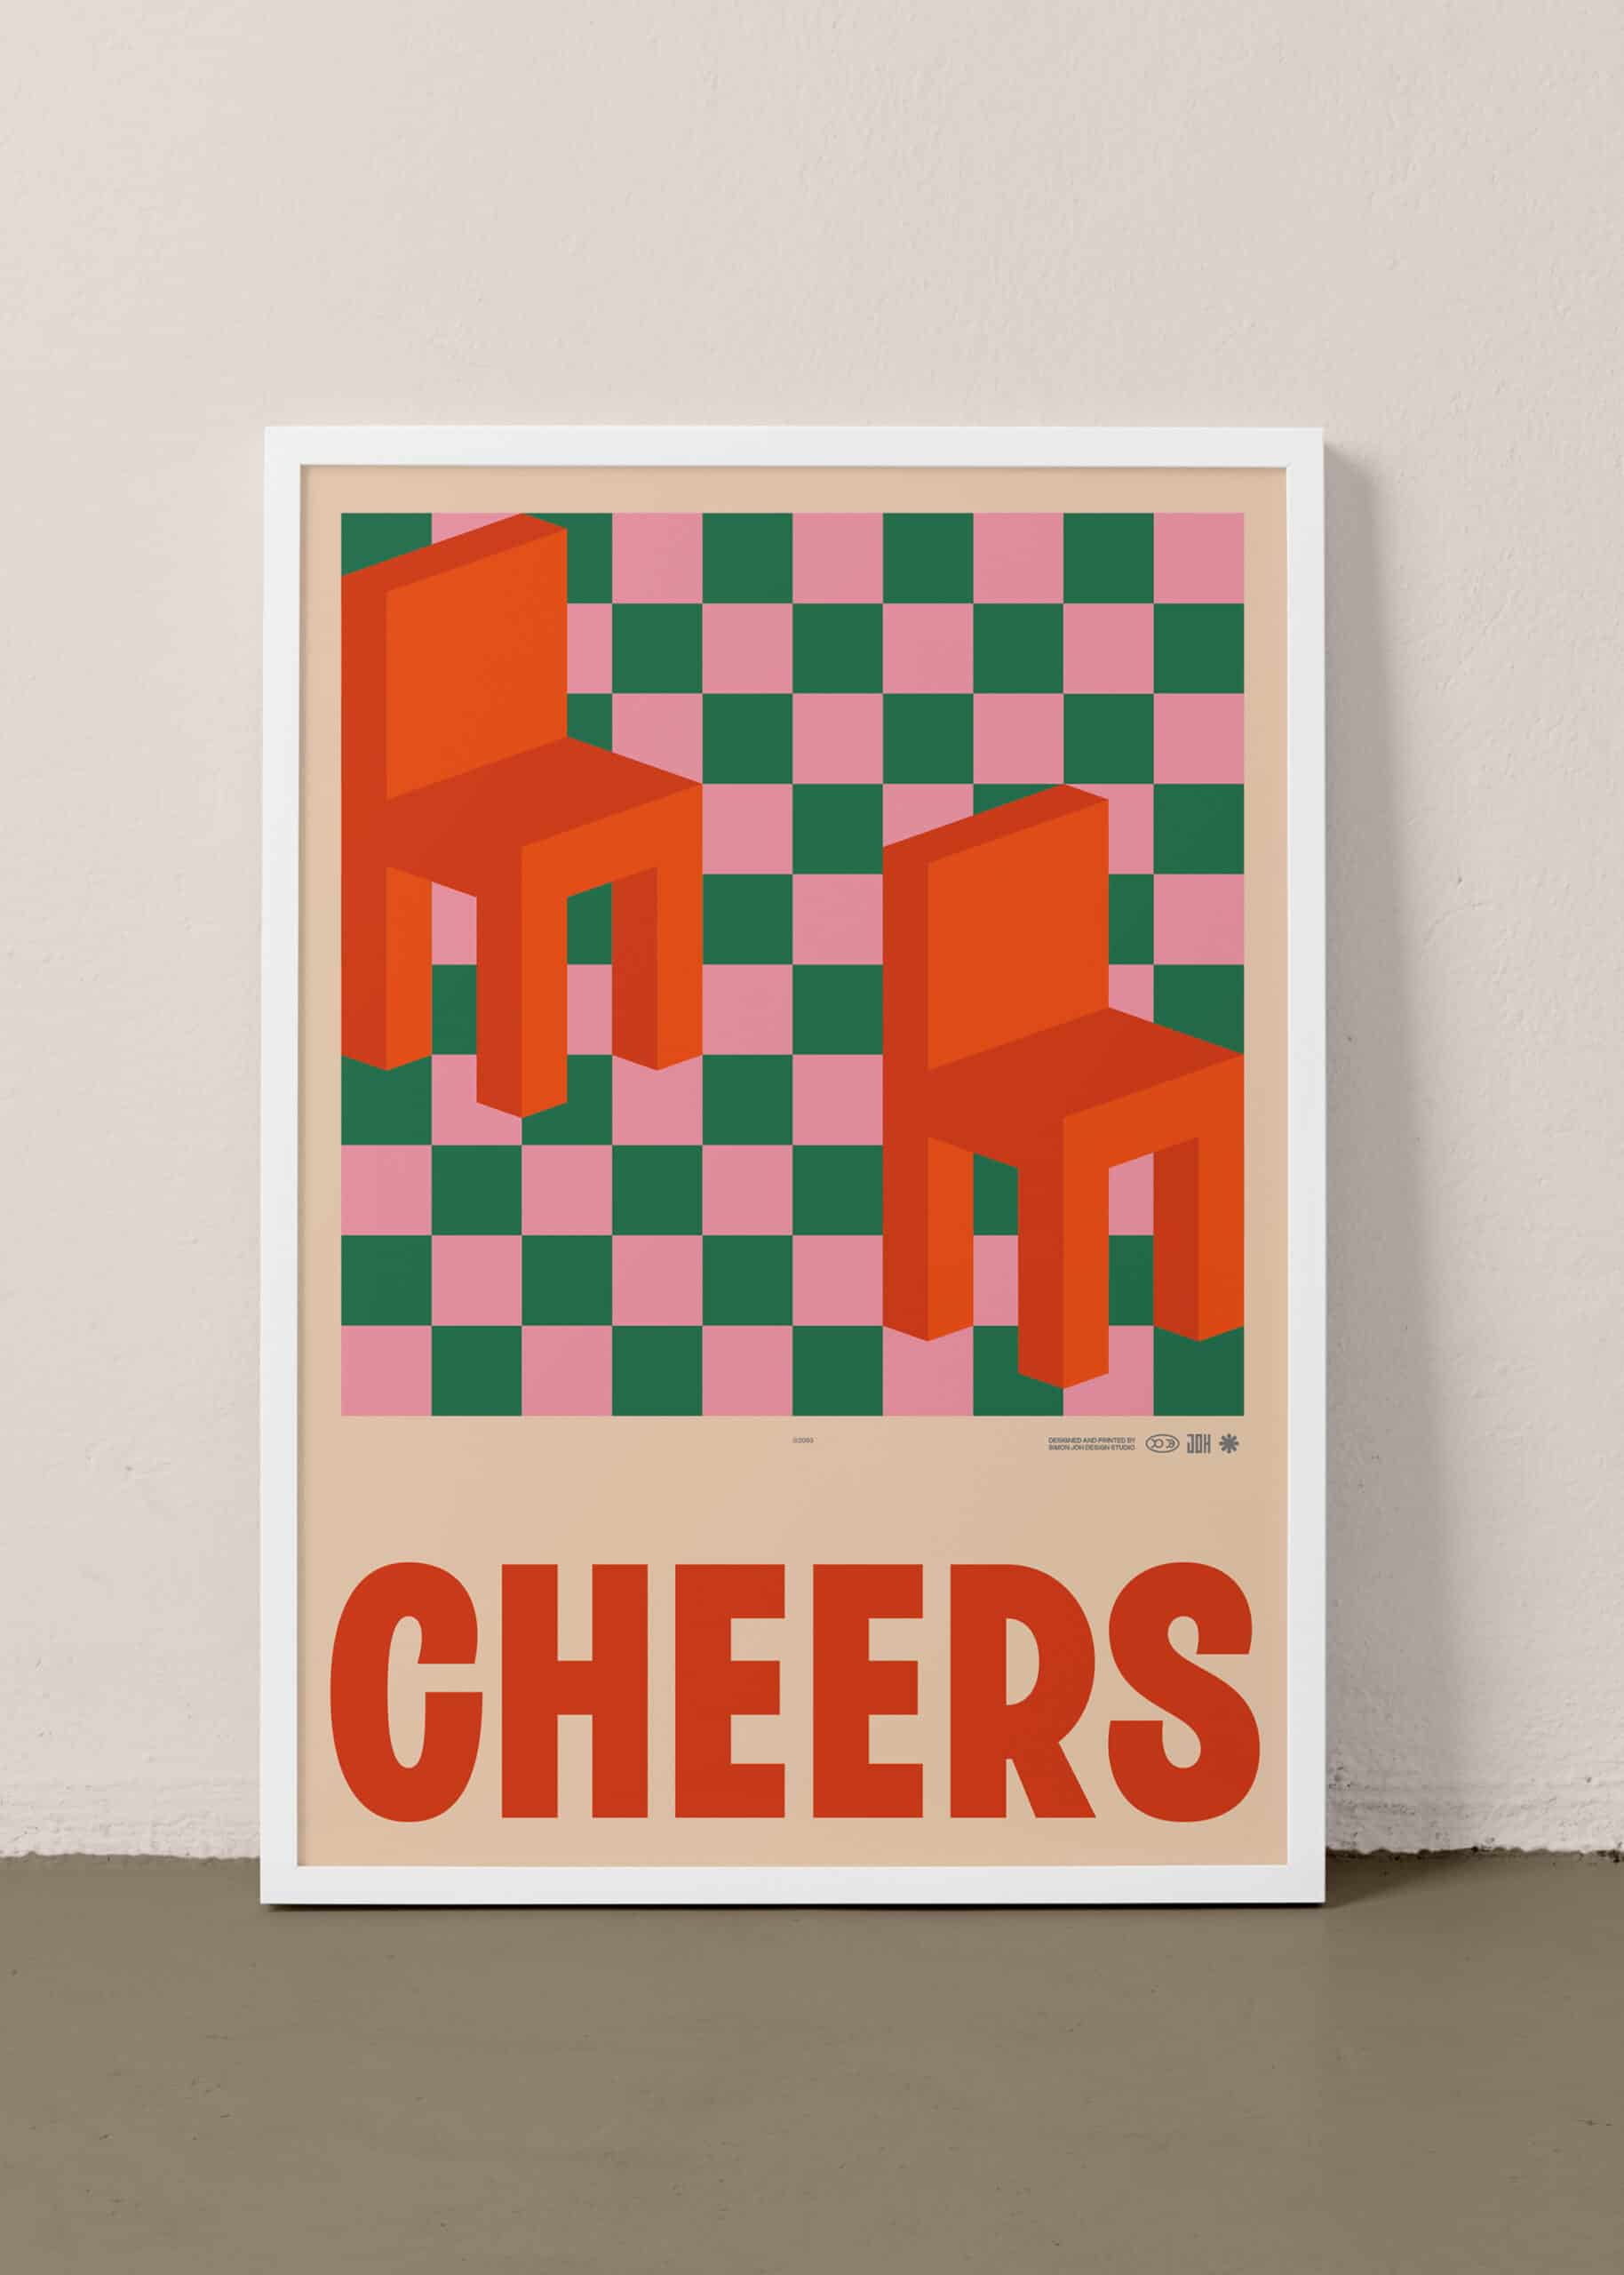 joh-poster_cheers